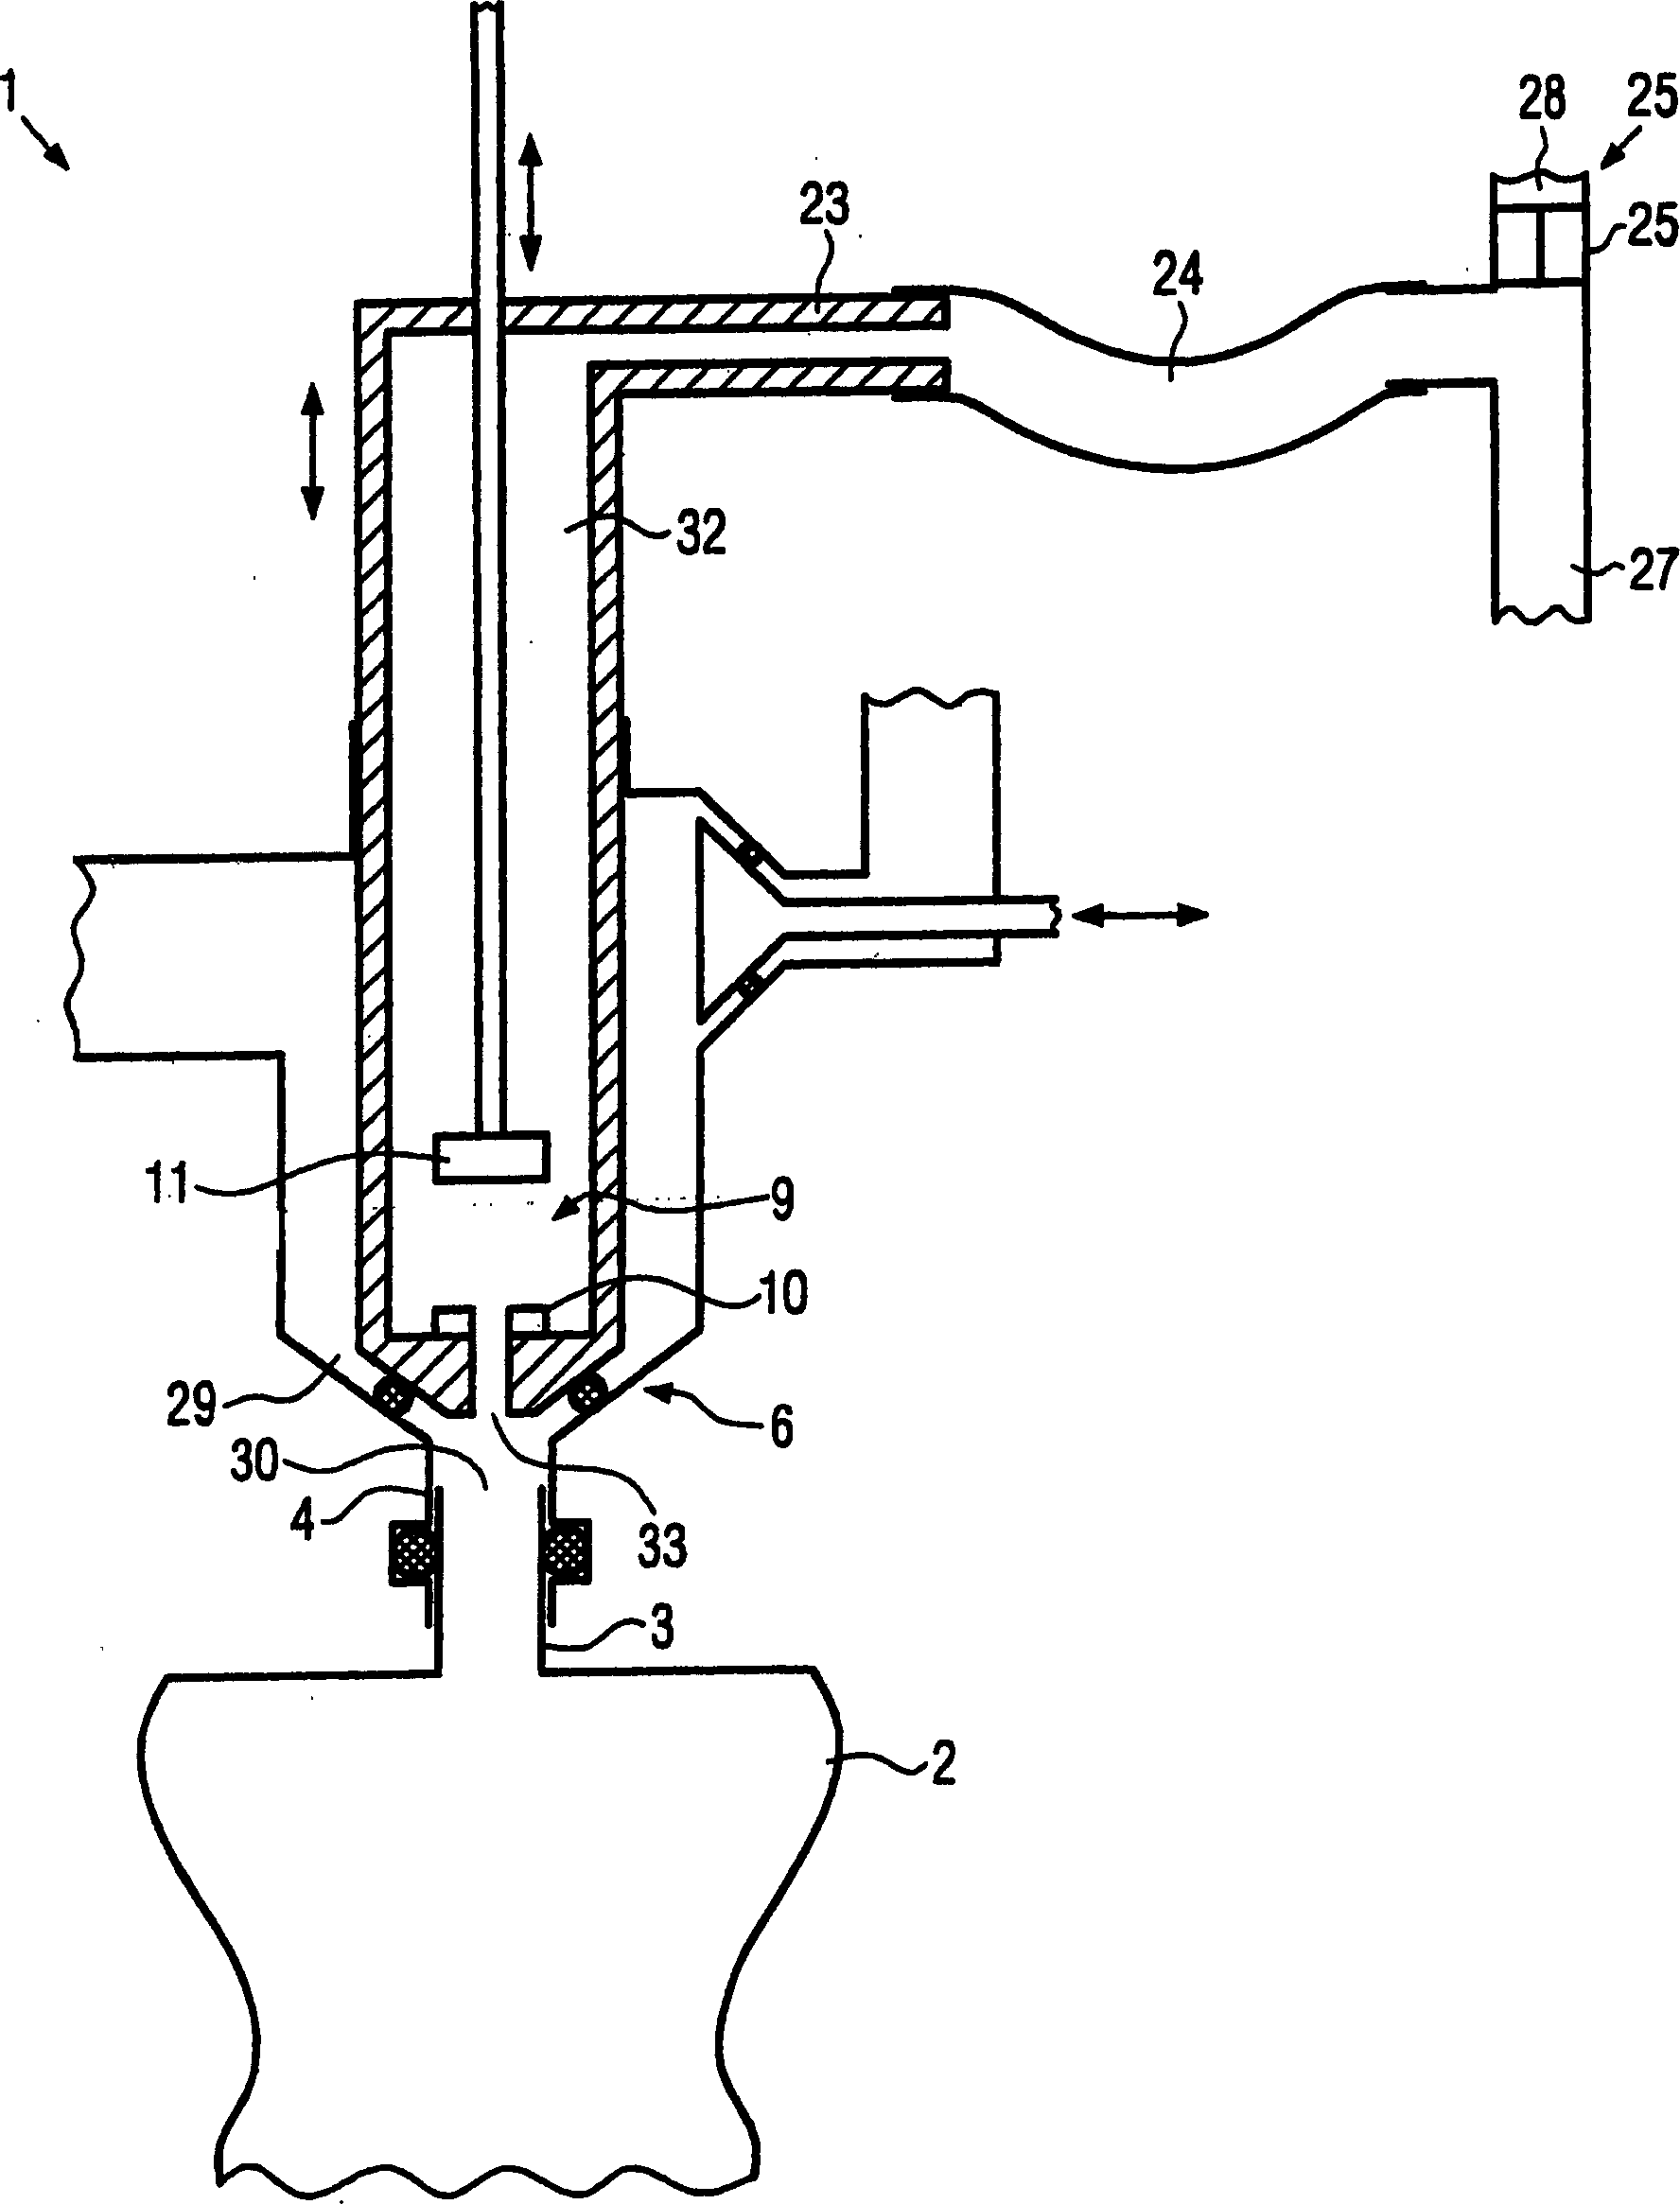 Method and apparatus for filling liquids into foil bags with a spout